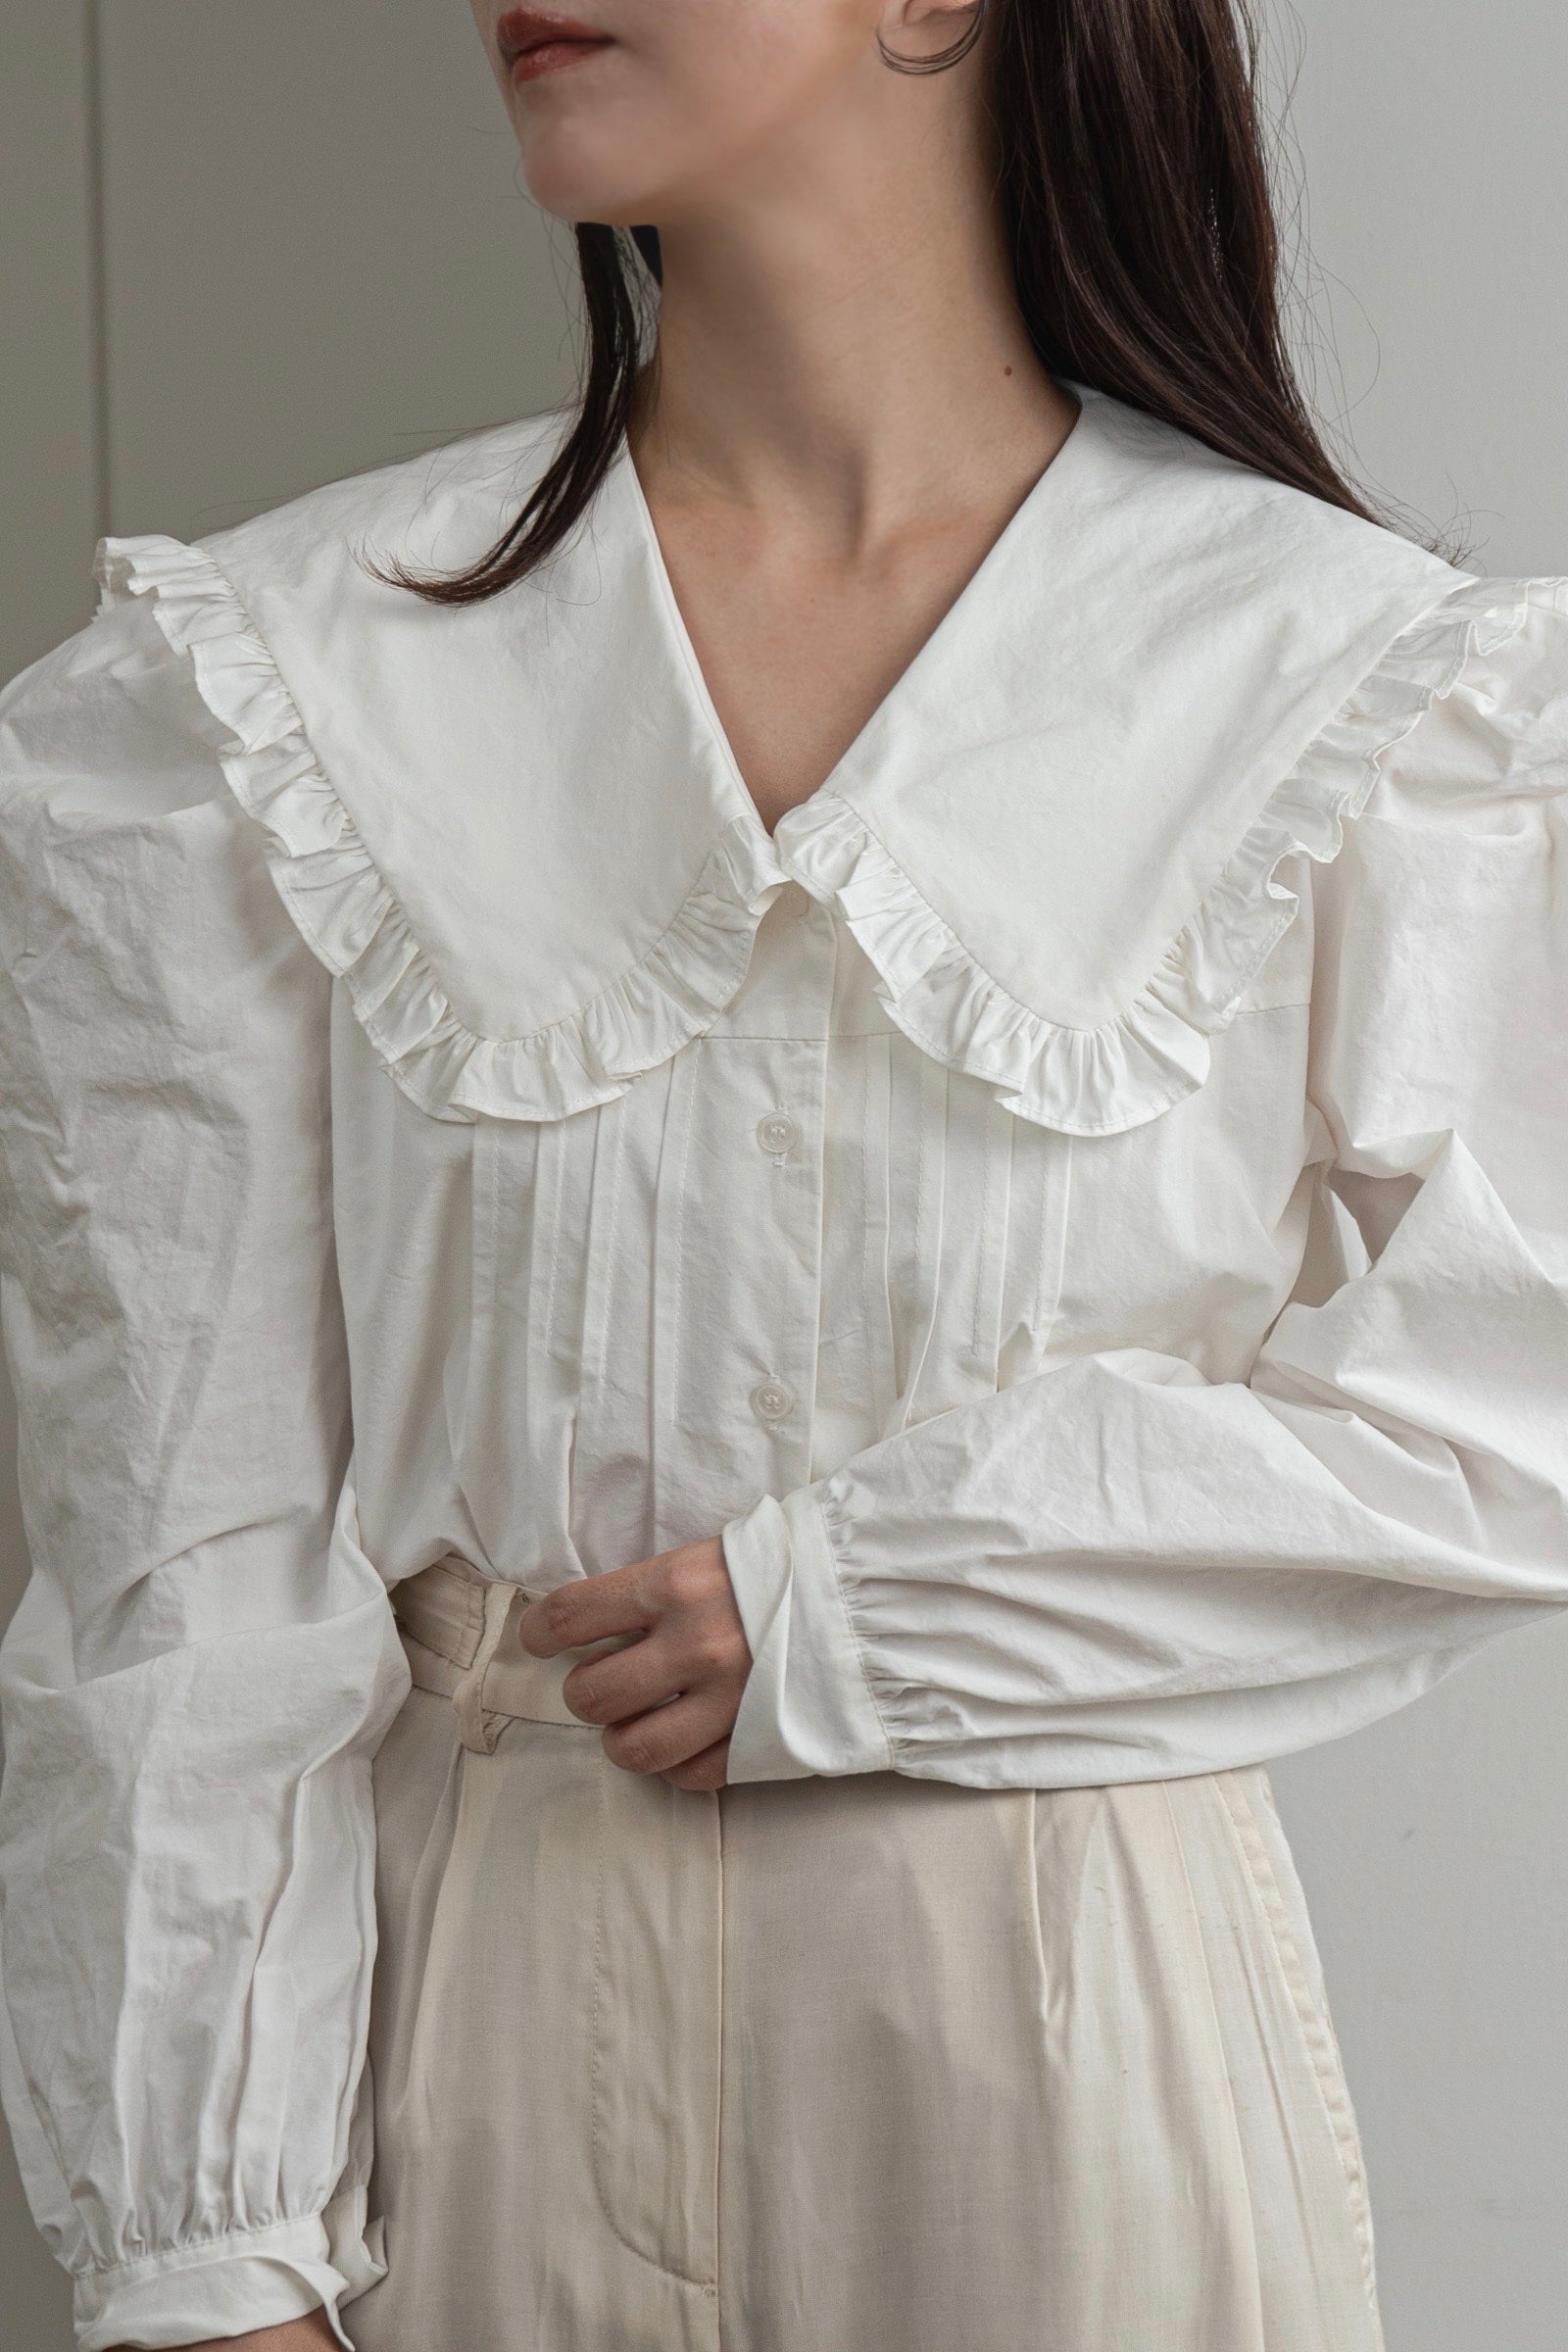 baybee pin tuck frill blouse (white)